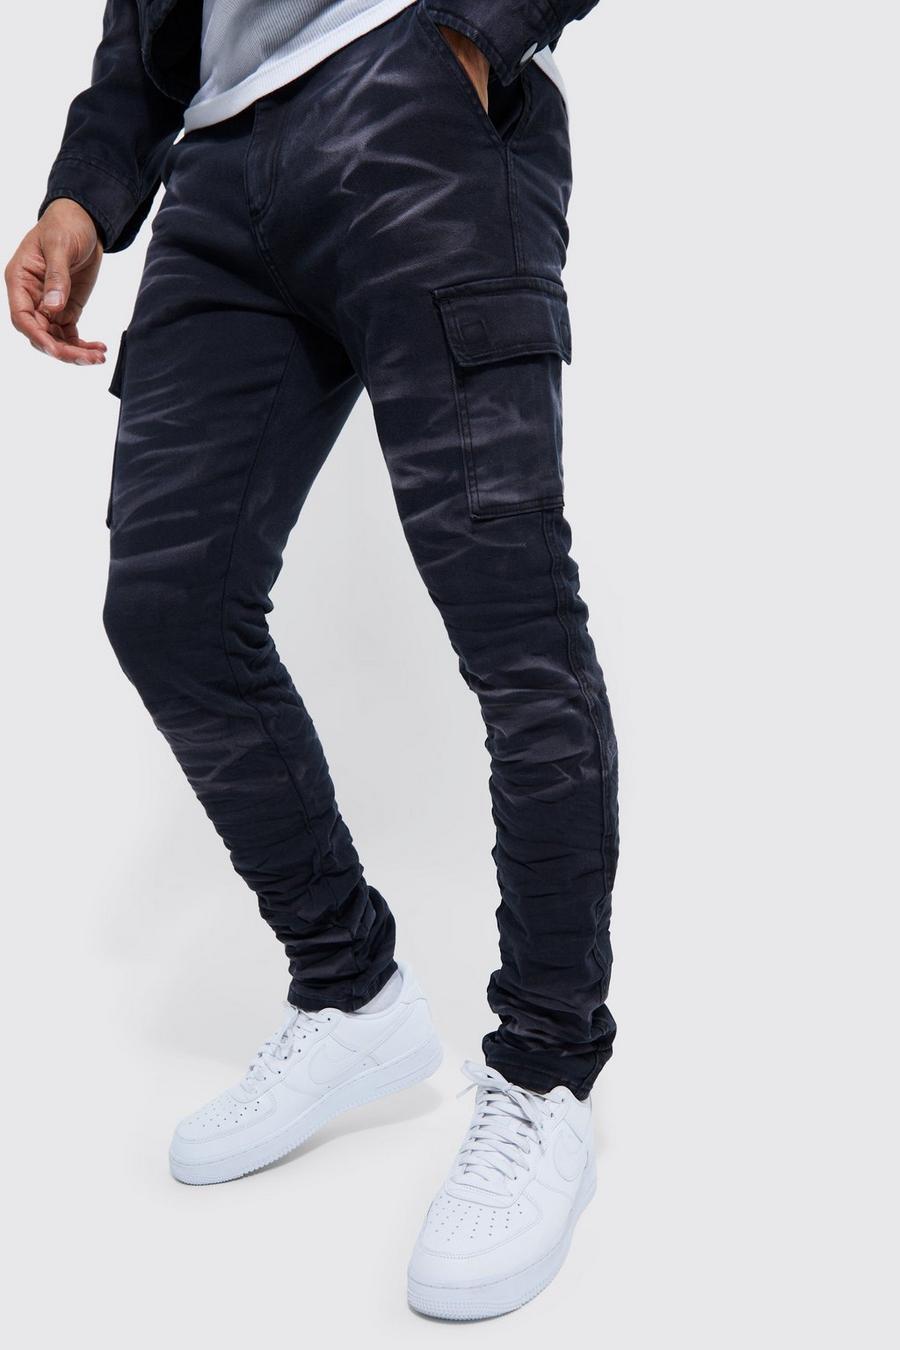 Black Fixed Waist Skinny Stacked Bleached Cargo